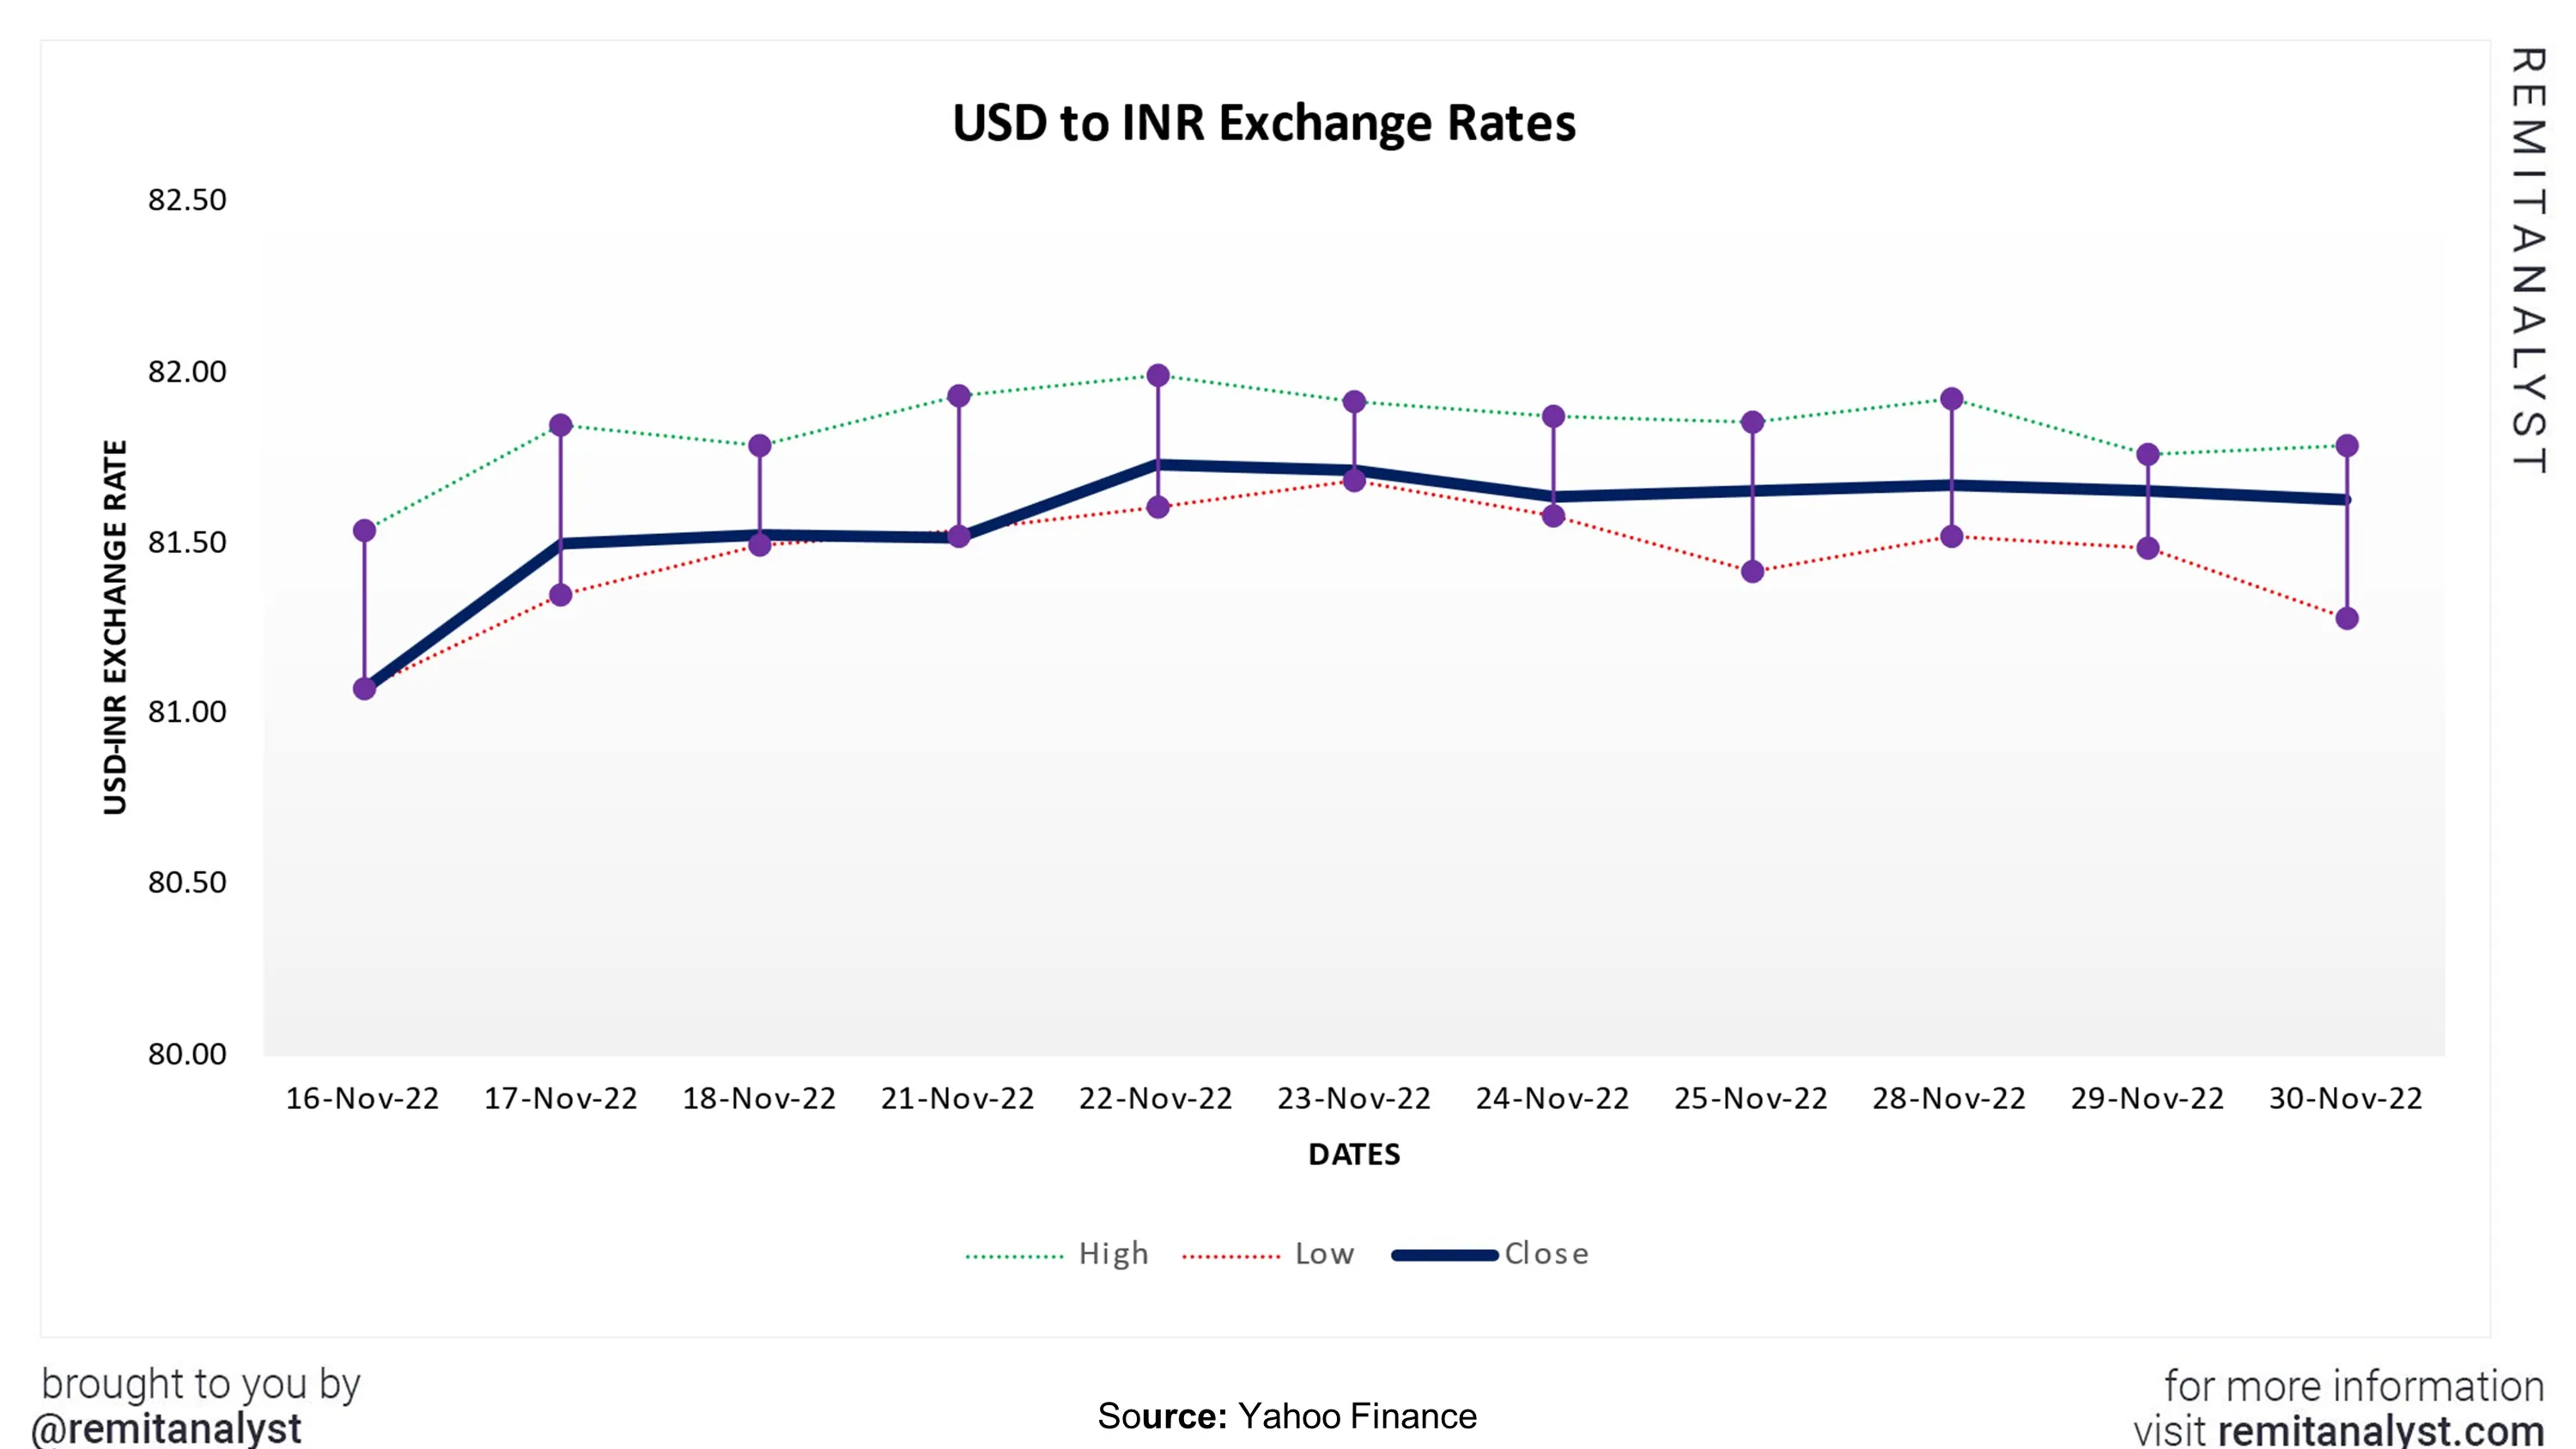 usd-to-inr-exchange-rate-from-16-nov-2022-to-30-nov-2022